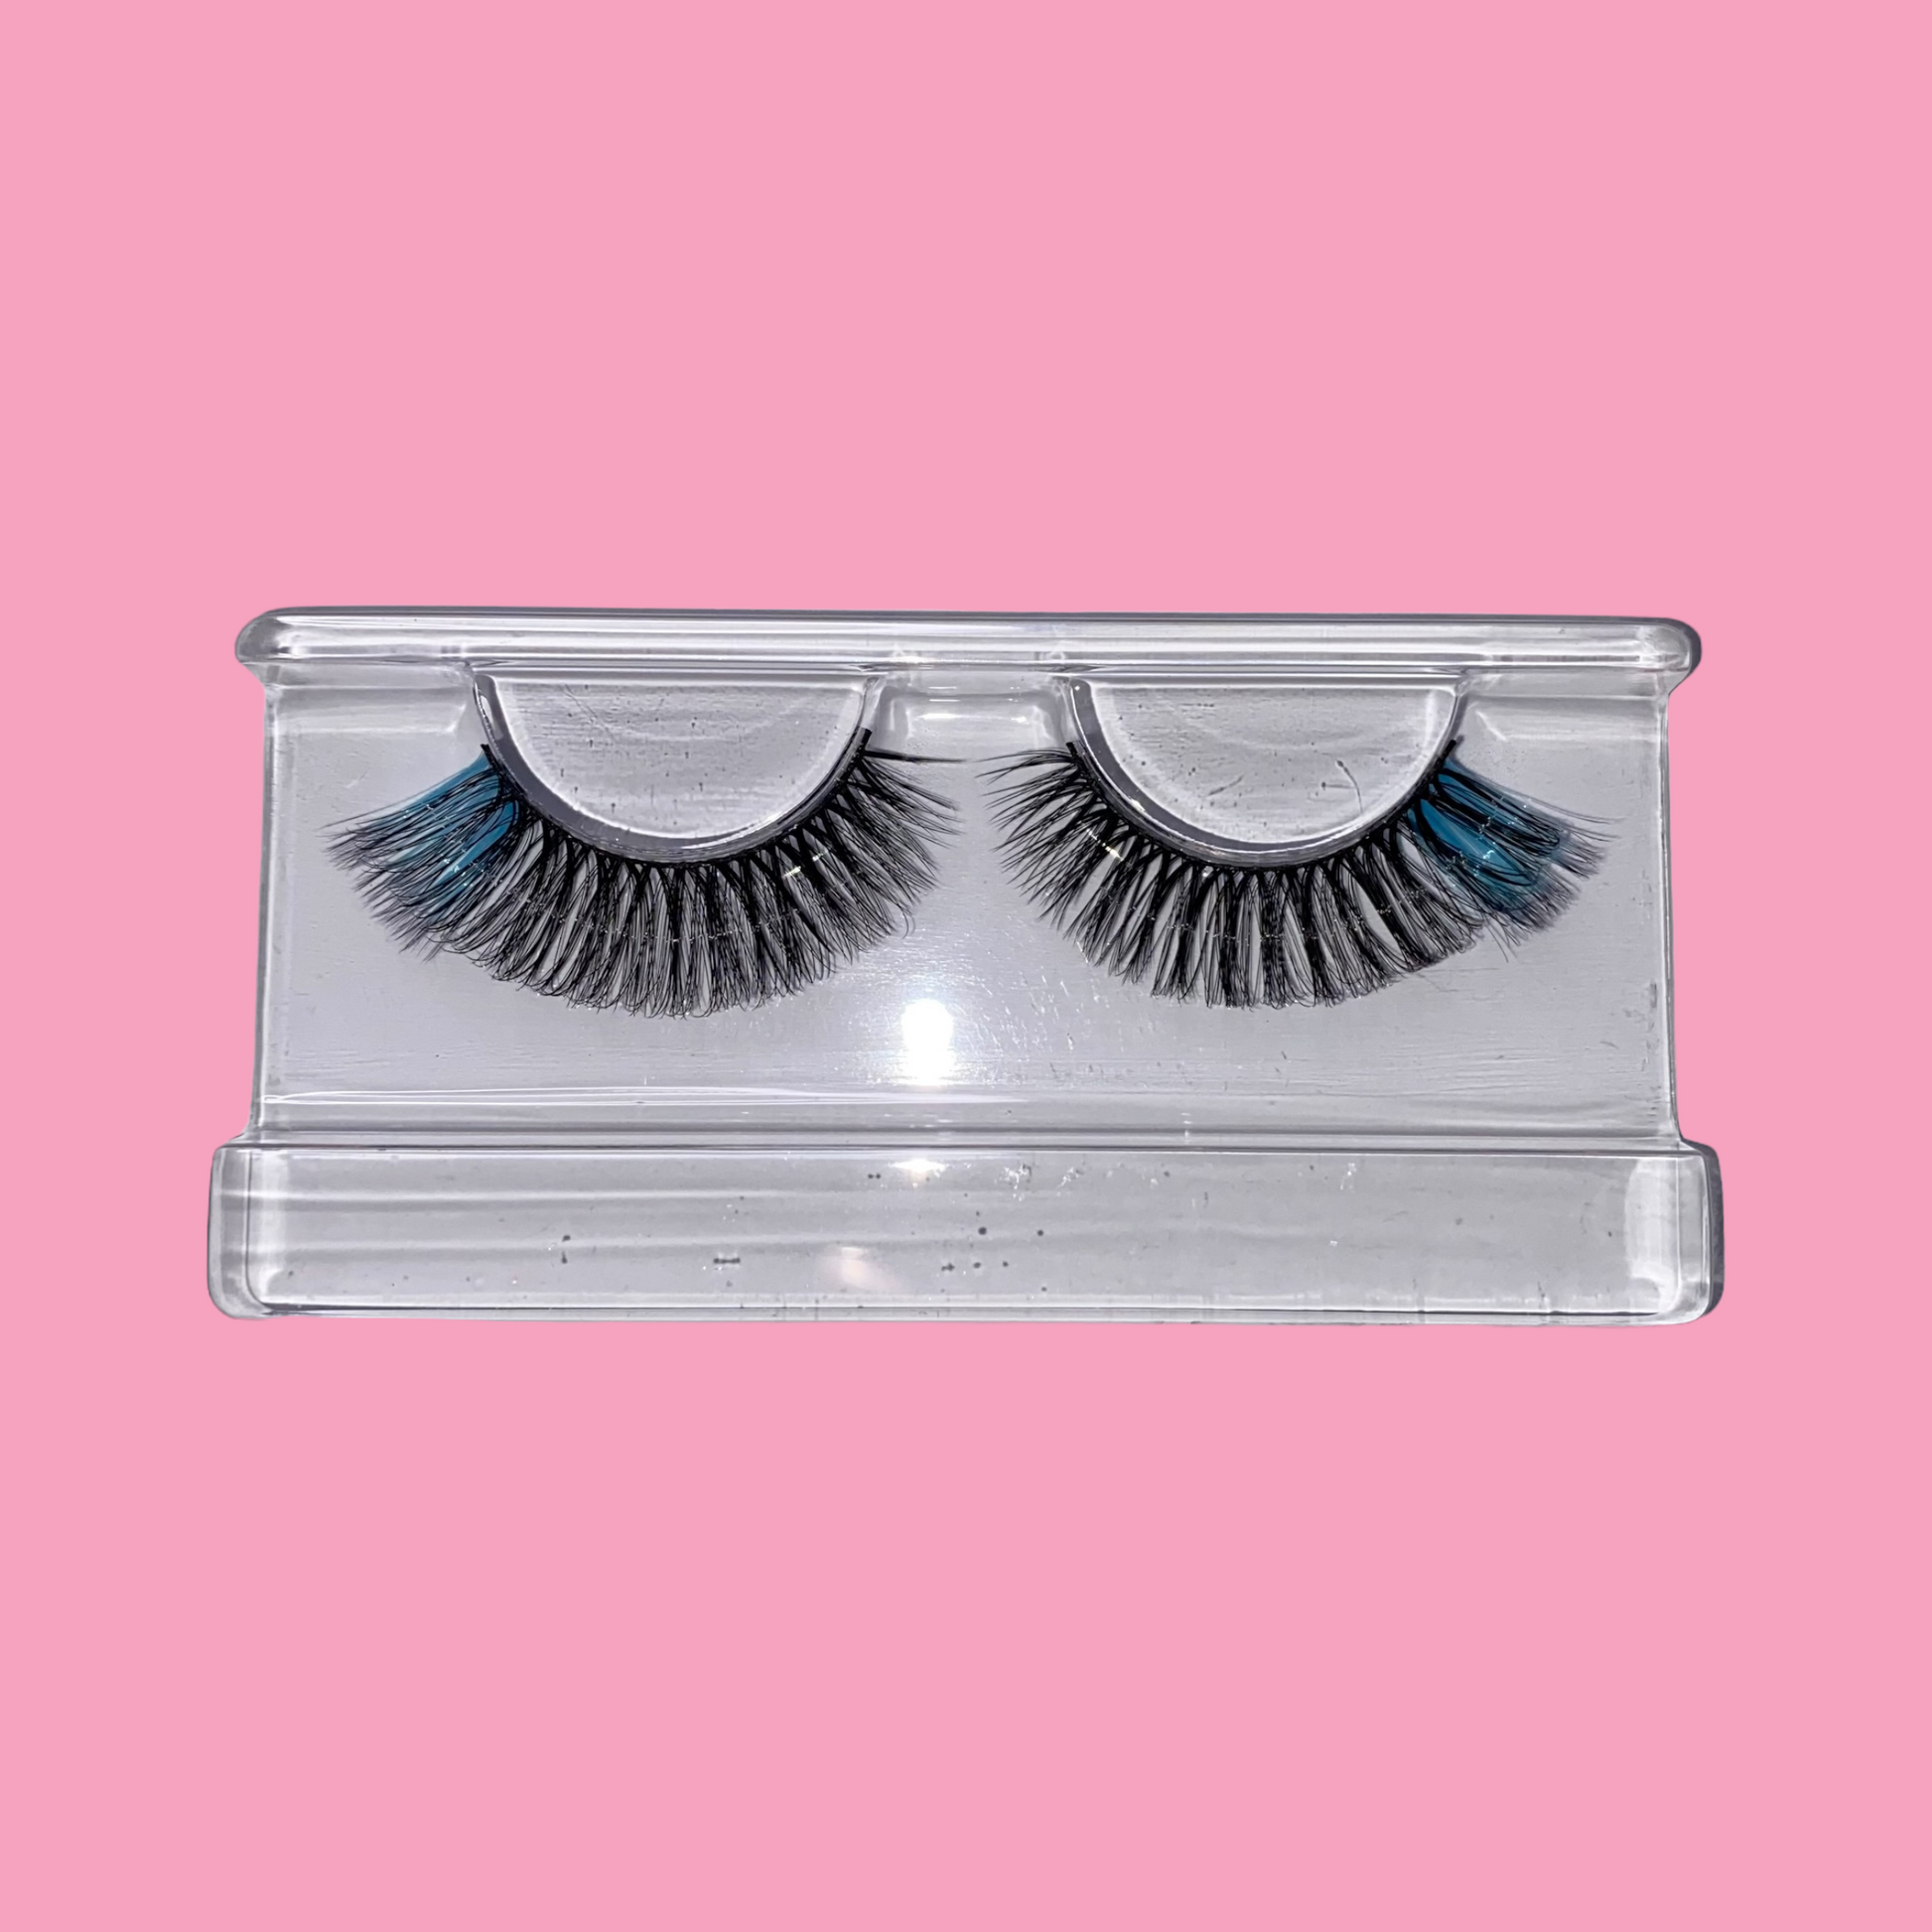 russian style cat eye strip lashes with blue at the ends